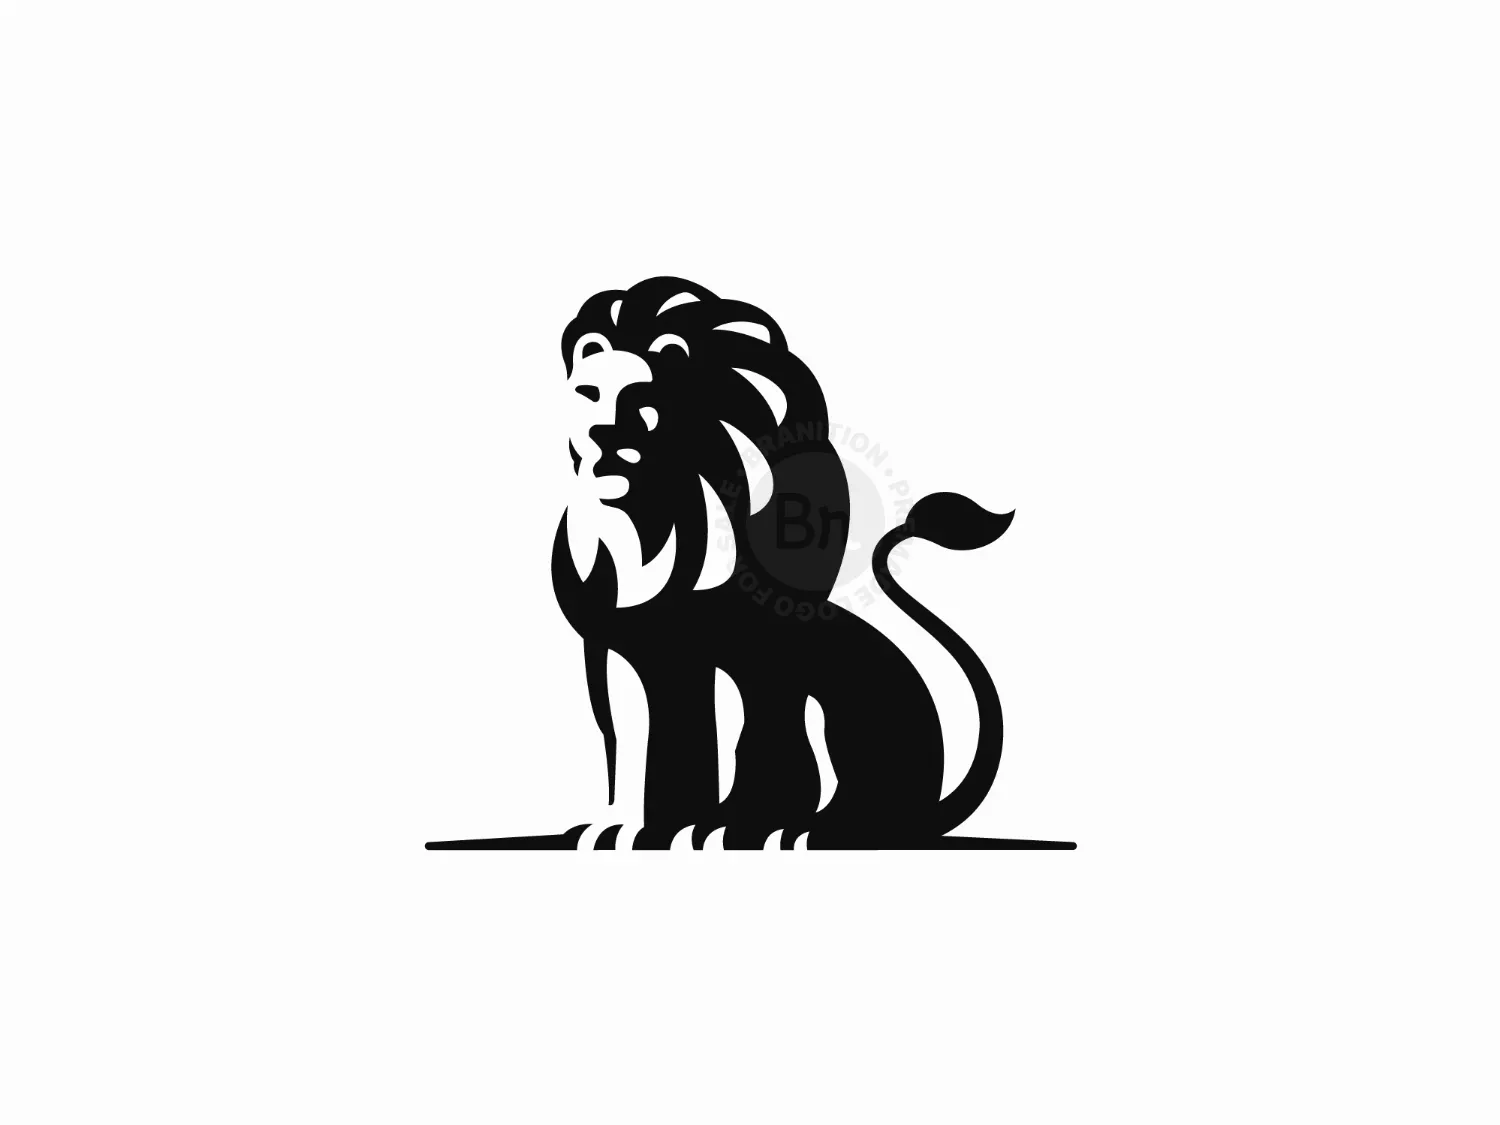 Black Lion Head Logo Or Mascot On White Background High-Res Vector Graphic  - Getty Images